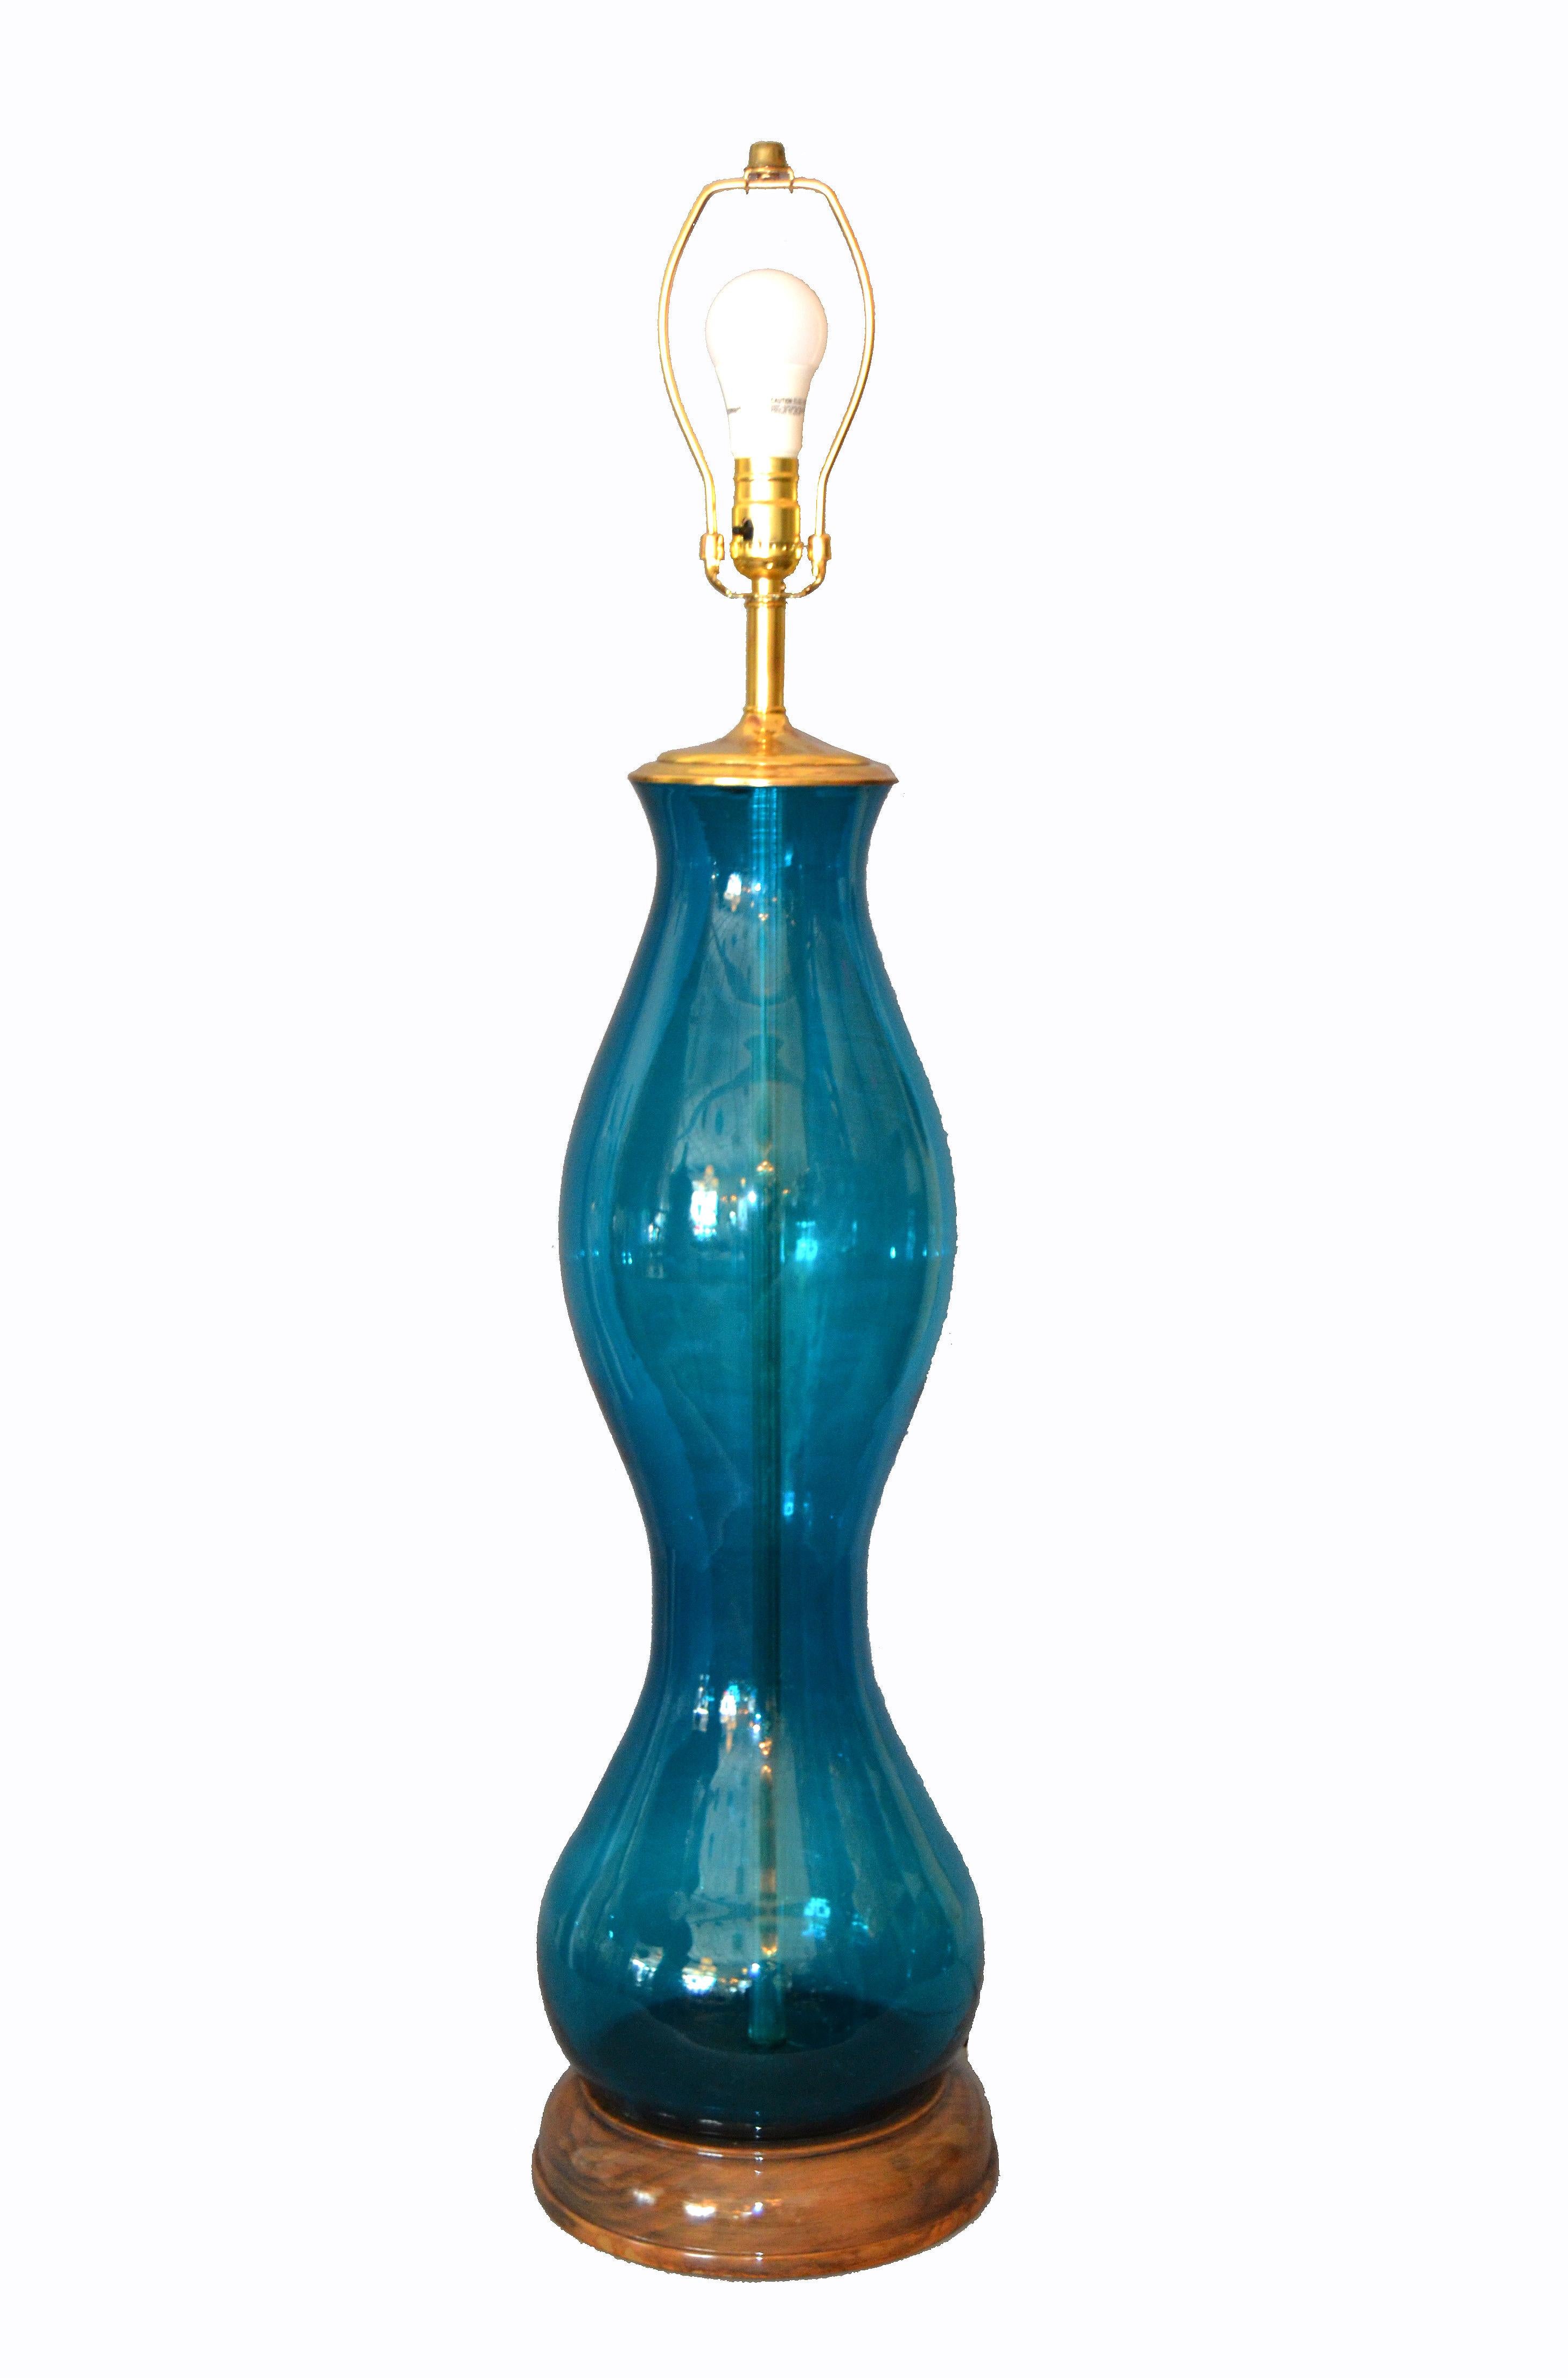 Original tall Mid-Century Modern hand blown art glass table lamp by Blenko.
The blue glass body is mounted on a wooden base and has a brass top with neck.
It is in perfect working condition and uses a max. 60 watts light bulb. We use LED lights. The